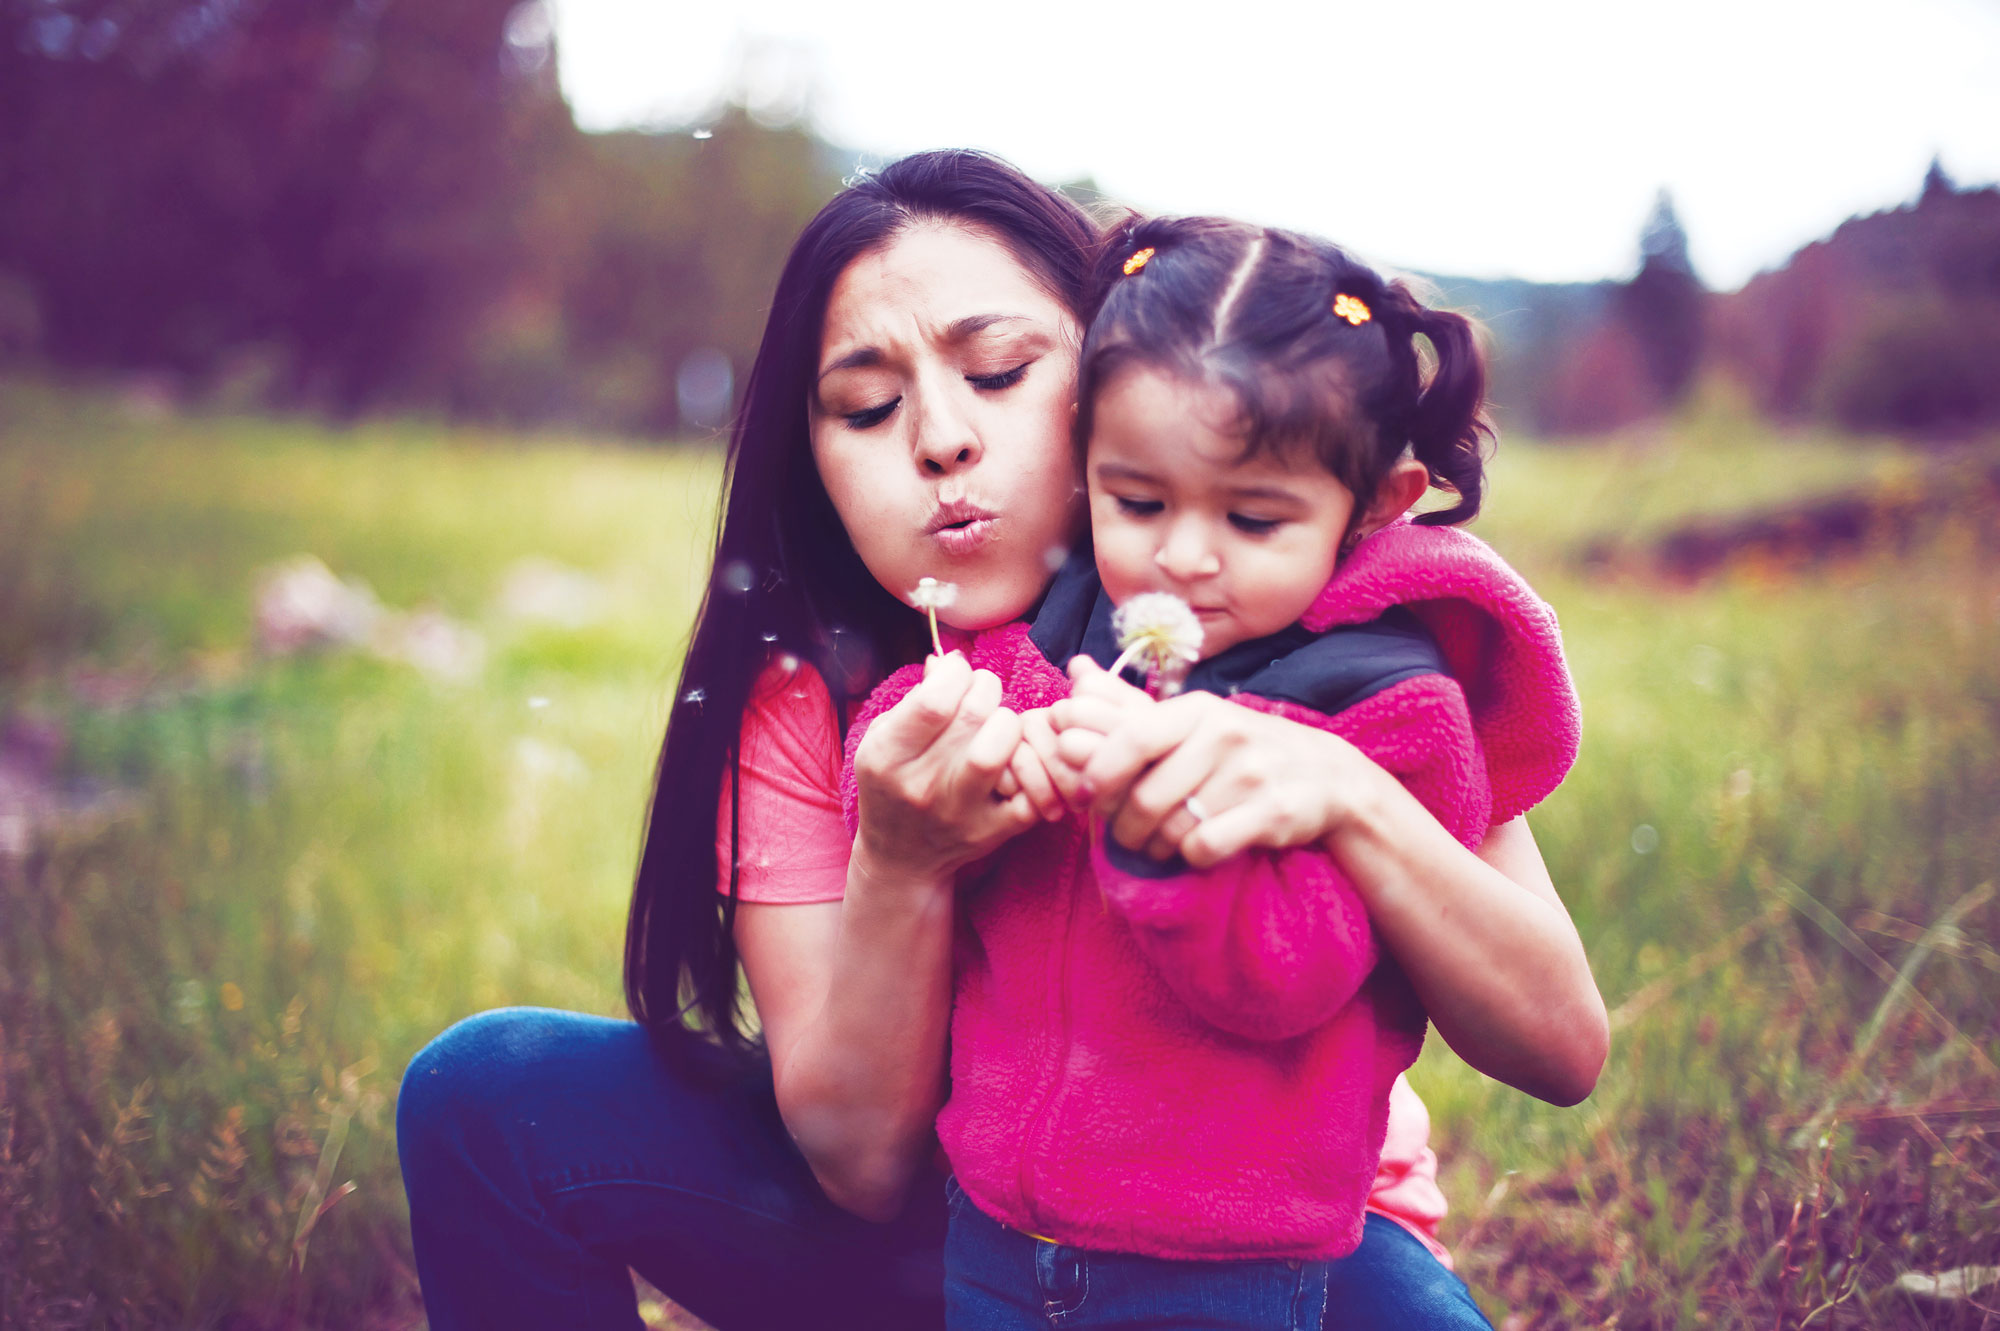 a mom and daughter blowing flowers in a field